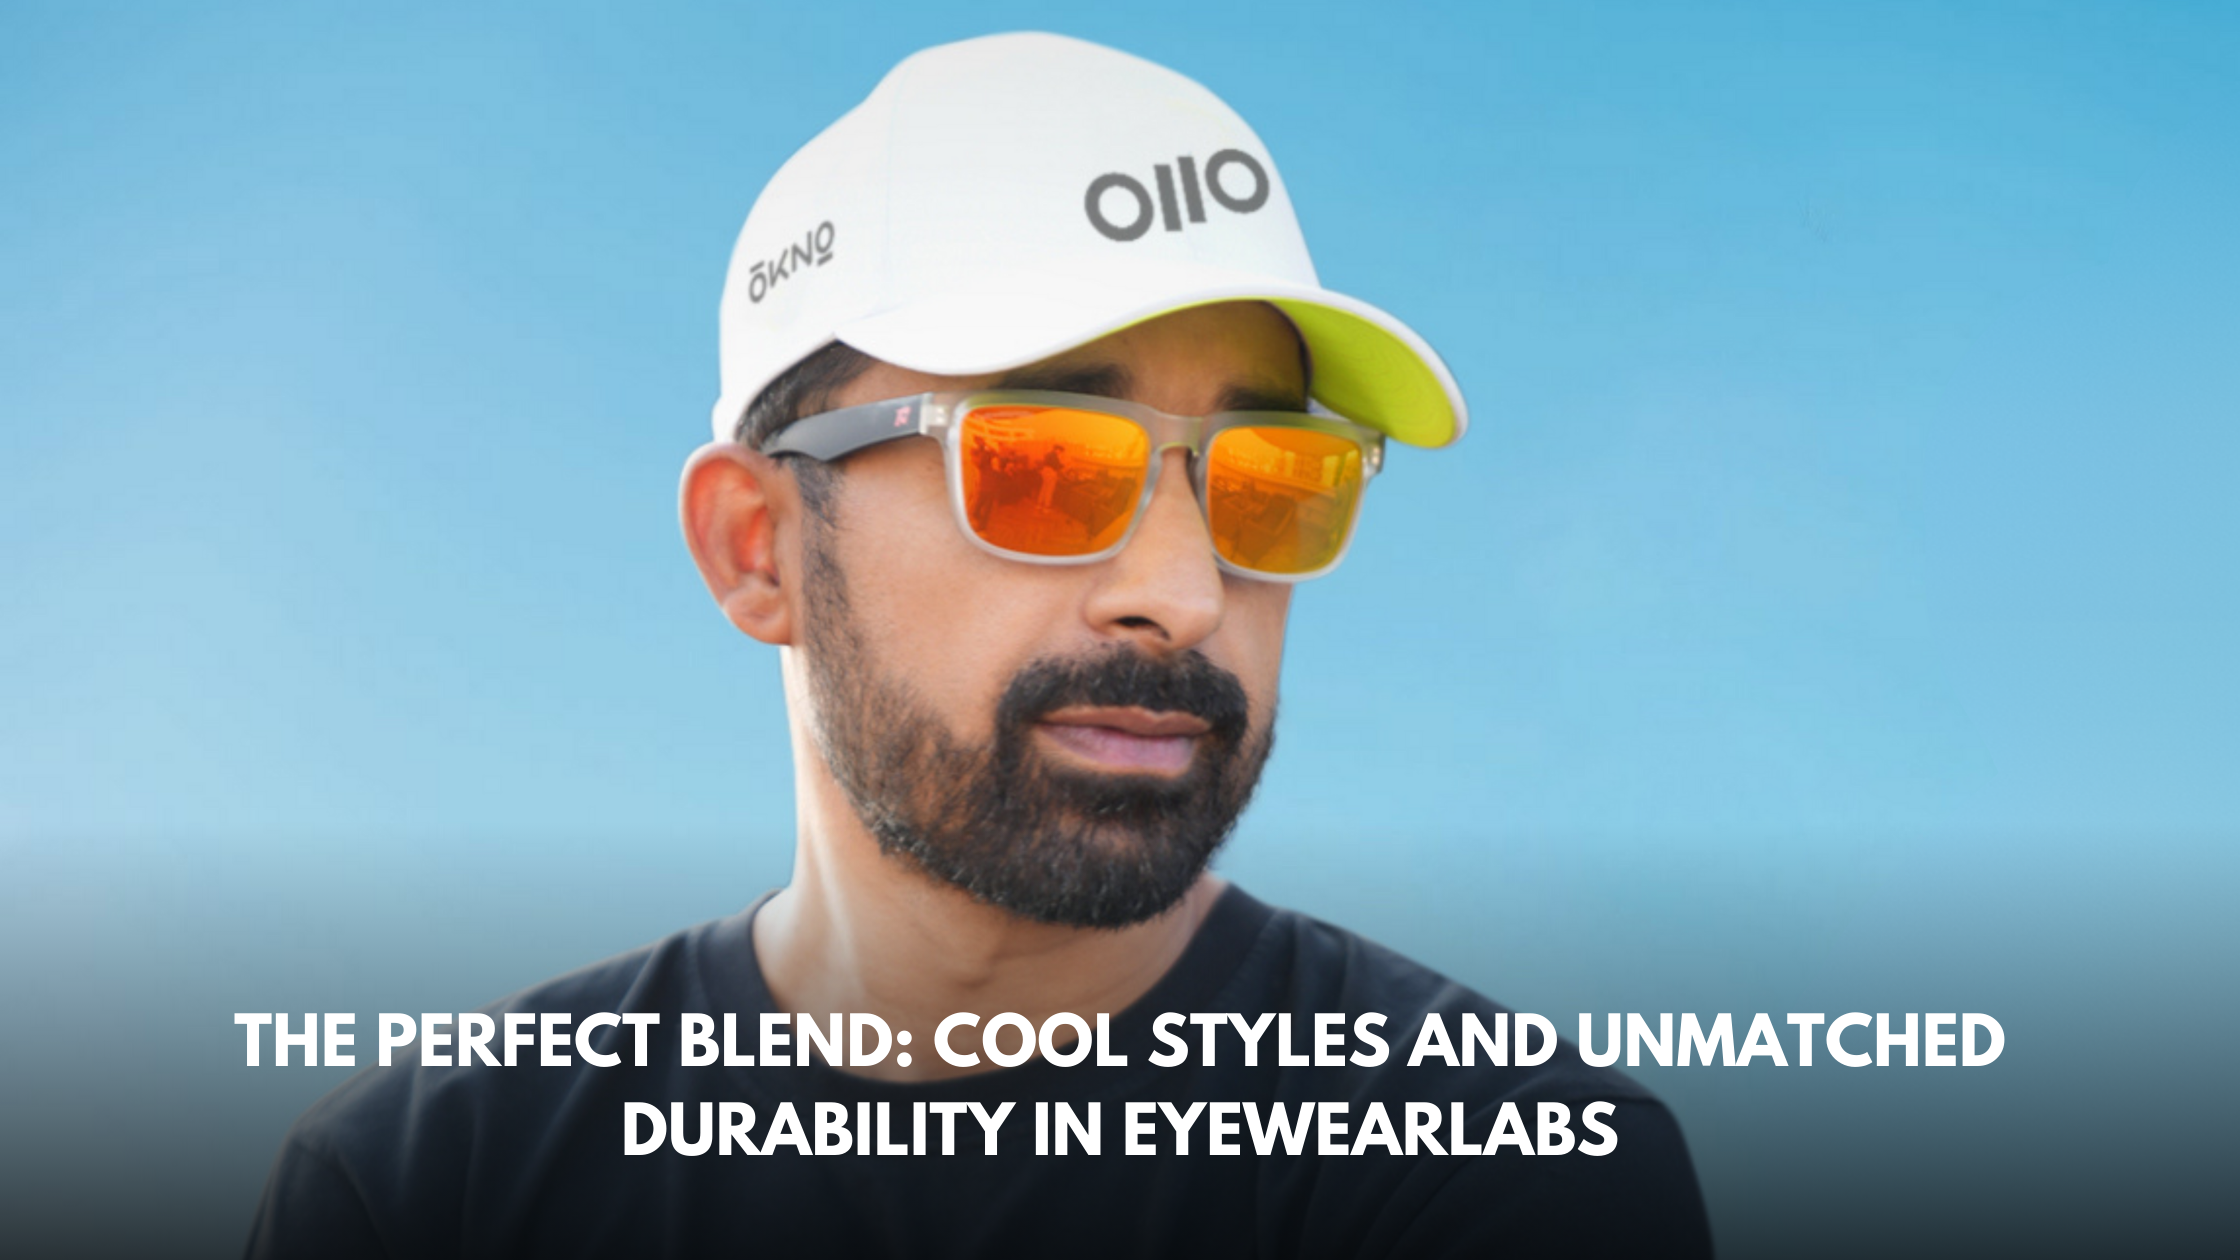 The Perfect Blend: Cool Styles and Unmatched Durability in Eyewearlabs